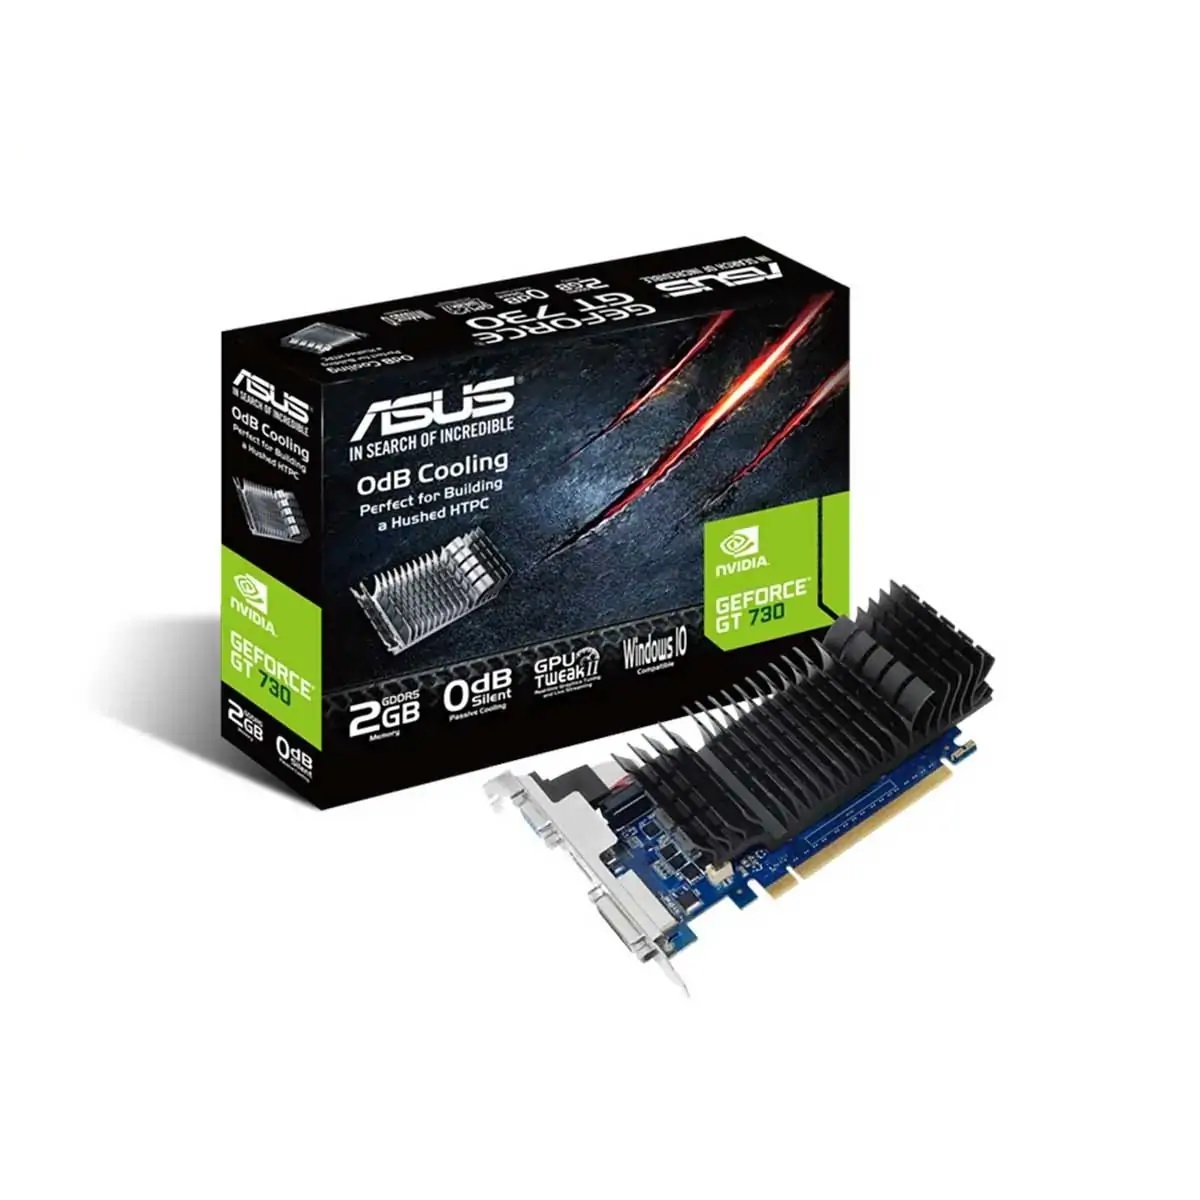 ASUS GeForce GT 730 2GB GDDR5 low profile graphics card for silent HTPC build